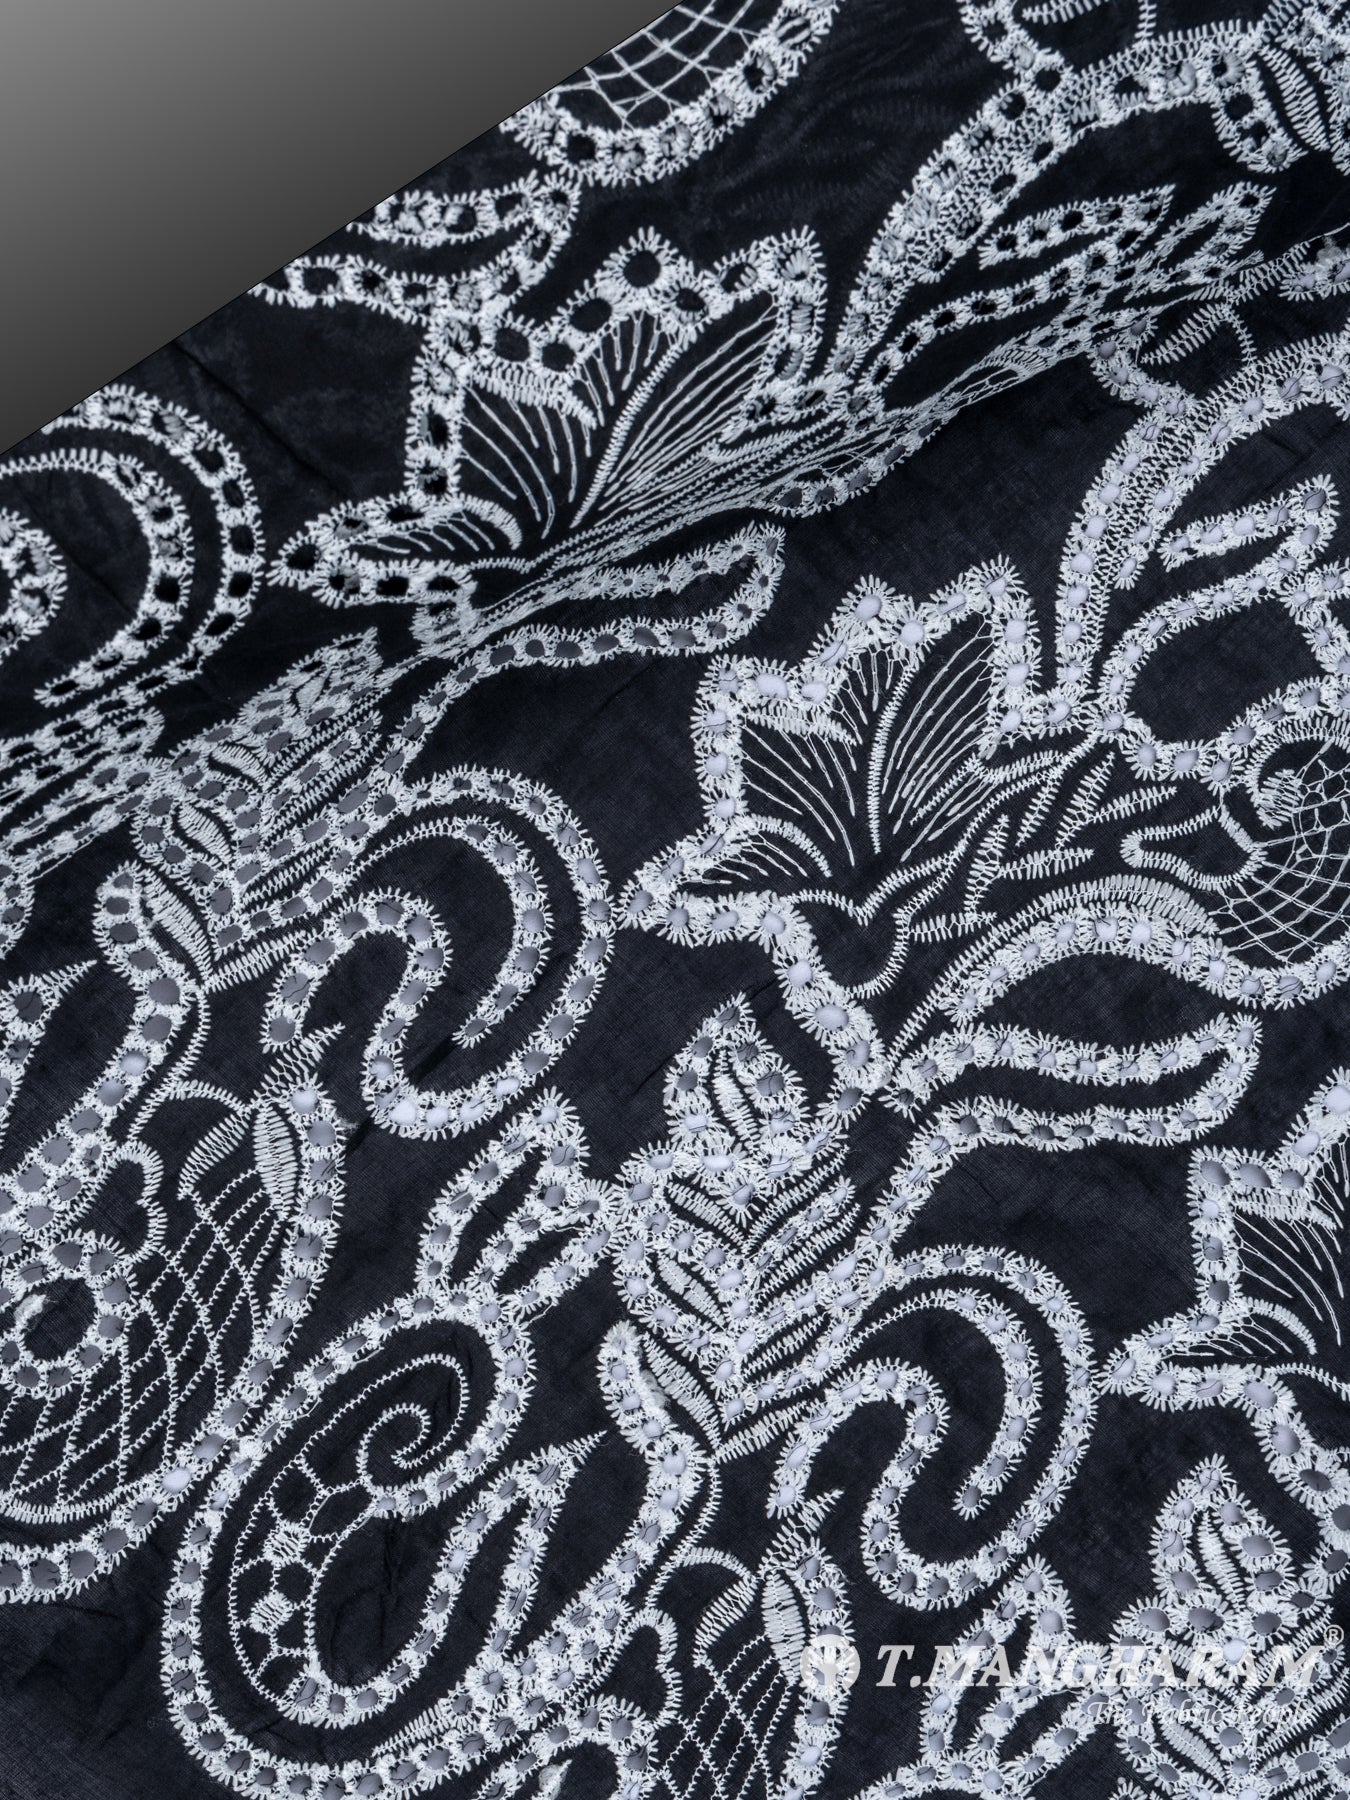 Black Cotton Embroidery Fabric - EC6744 view-2